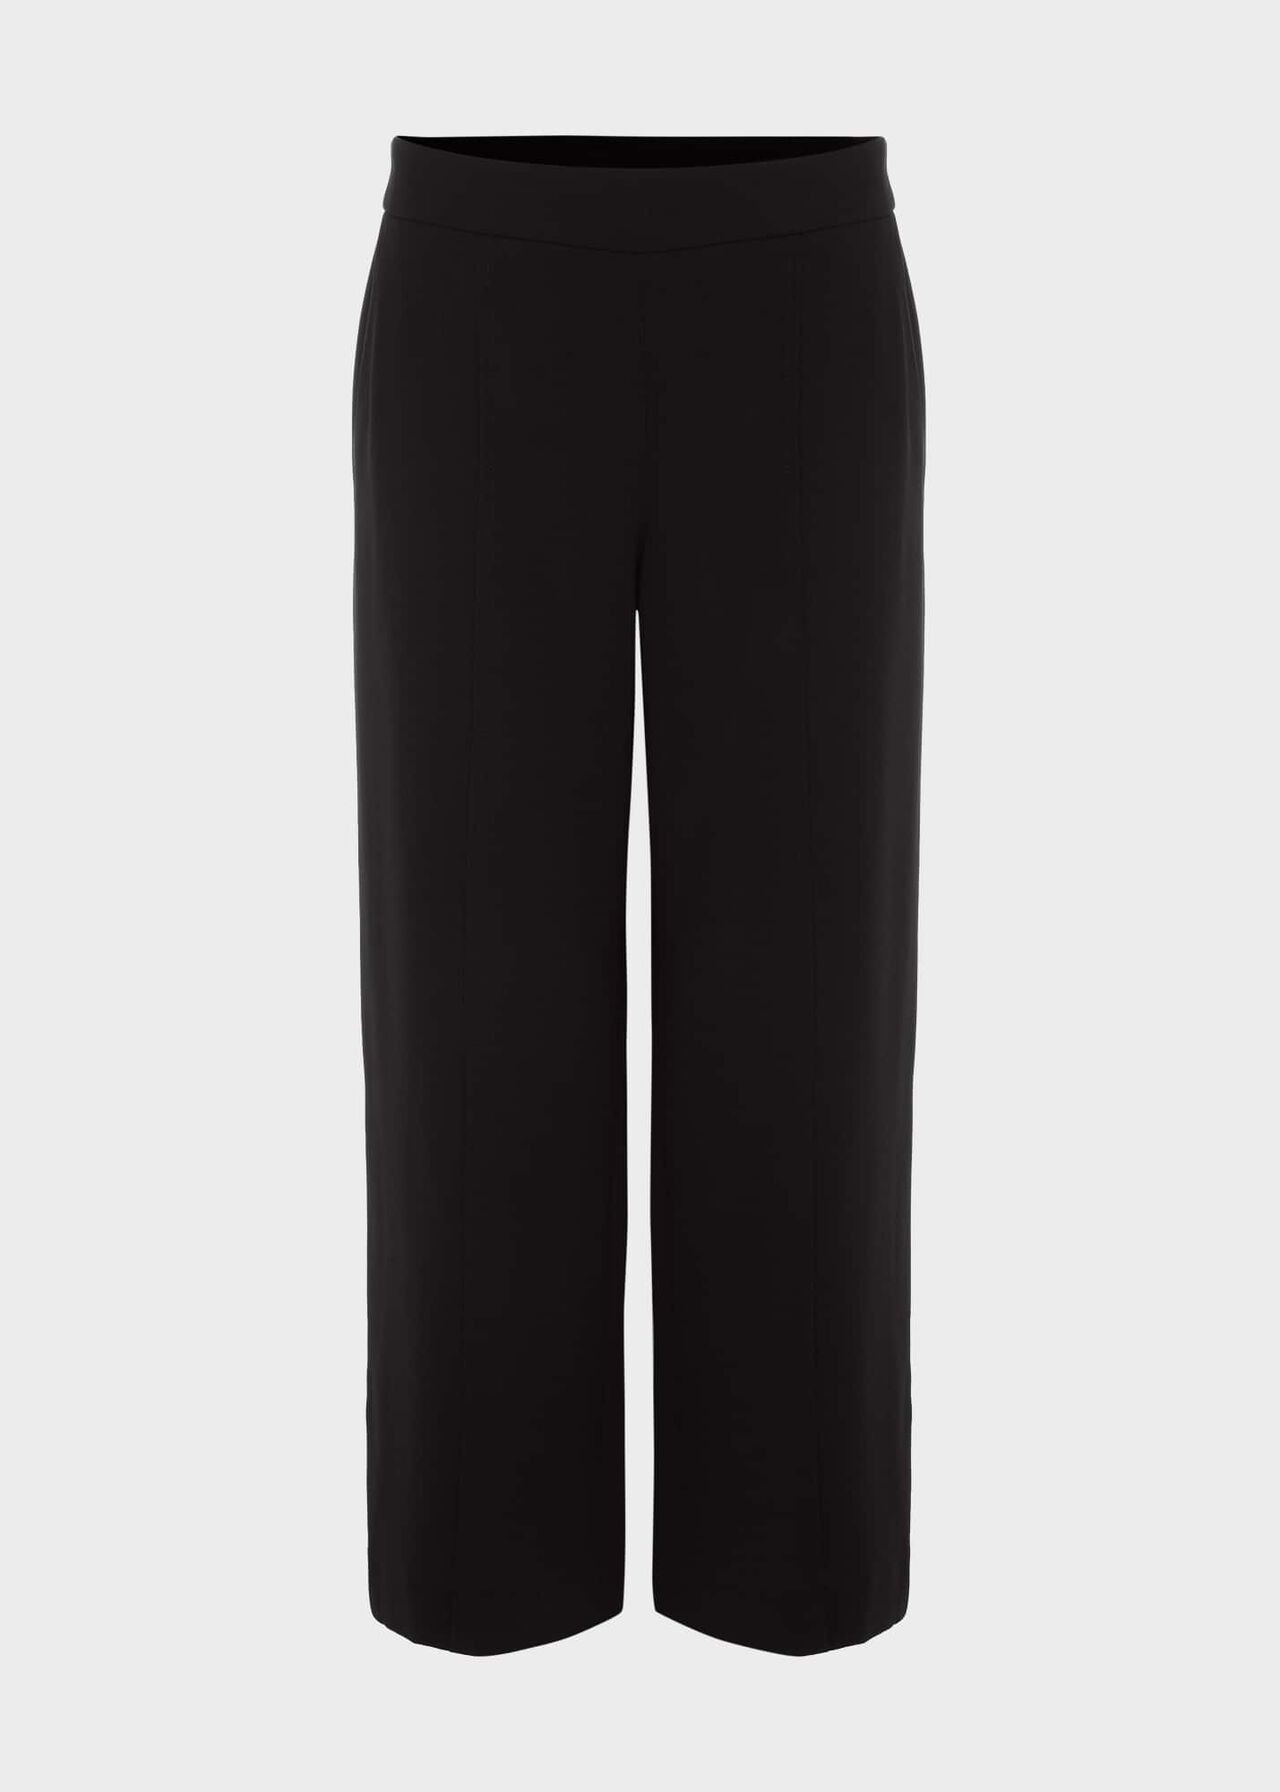 Lula Cropped Pants With Stretch, Black, hi-res